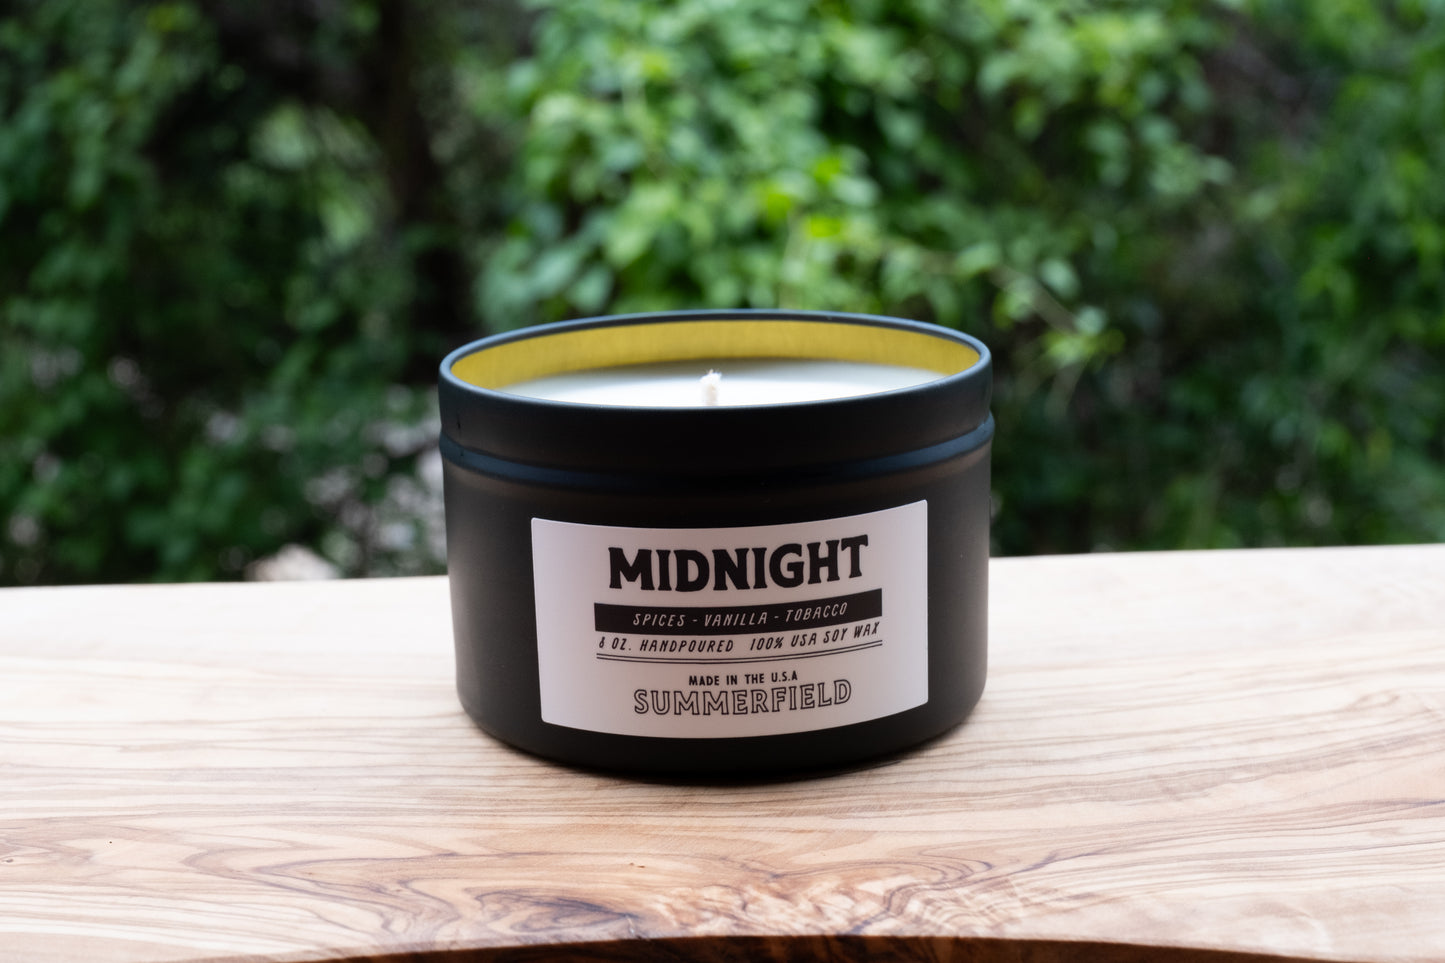 "Midnight" Soy Wax Candle